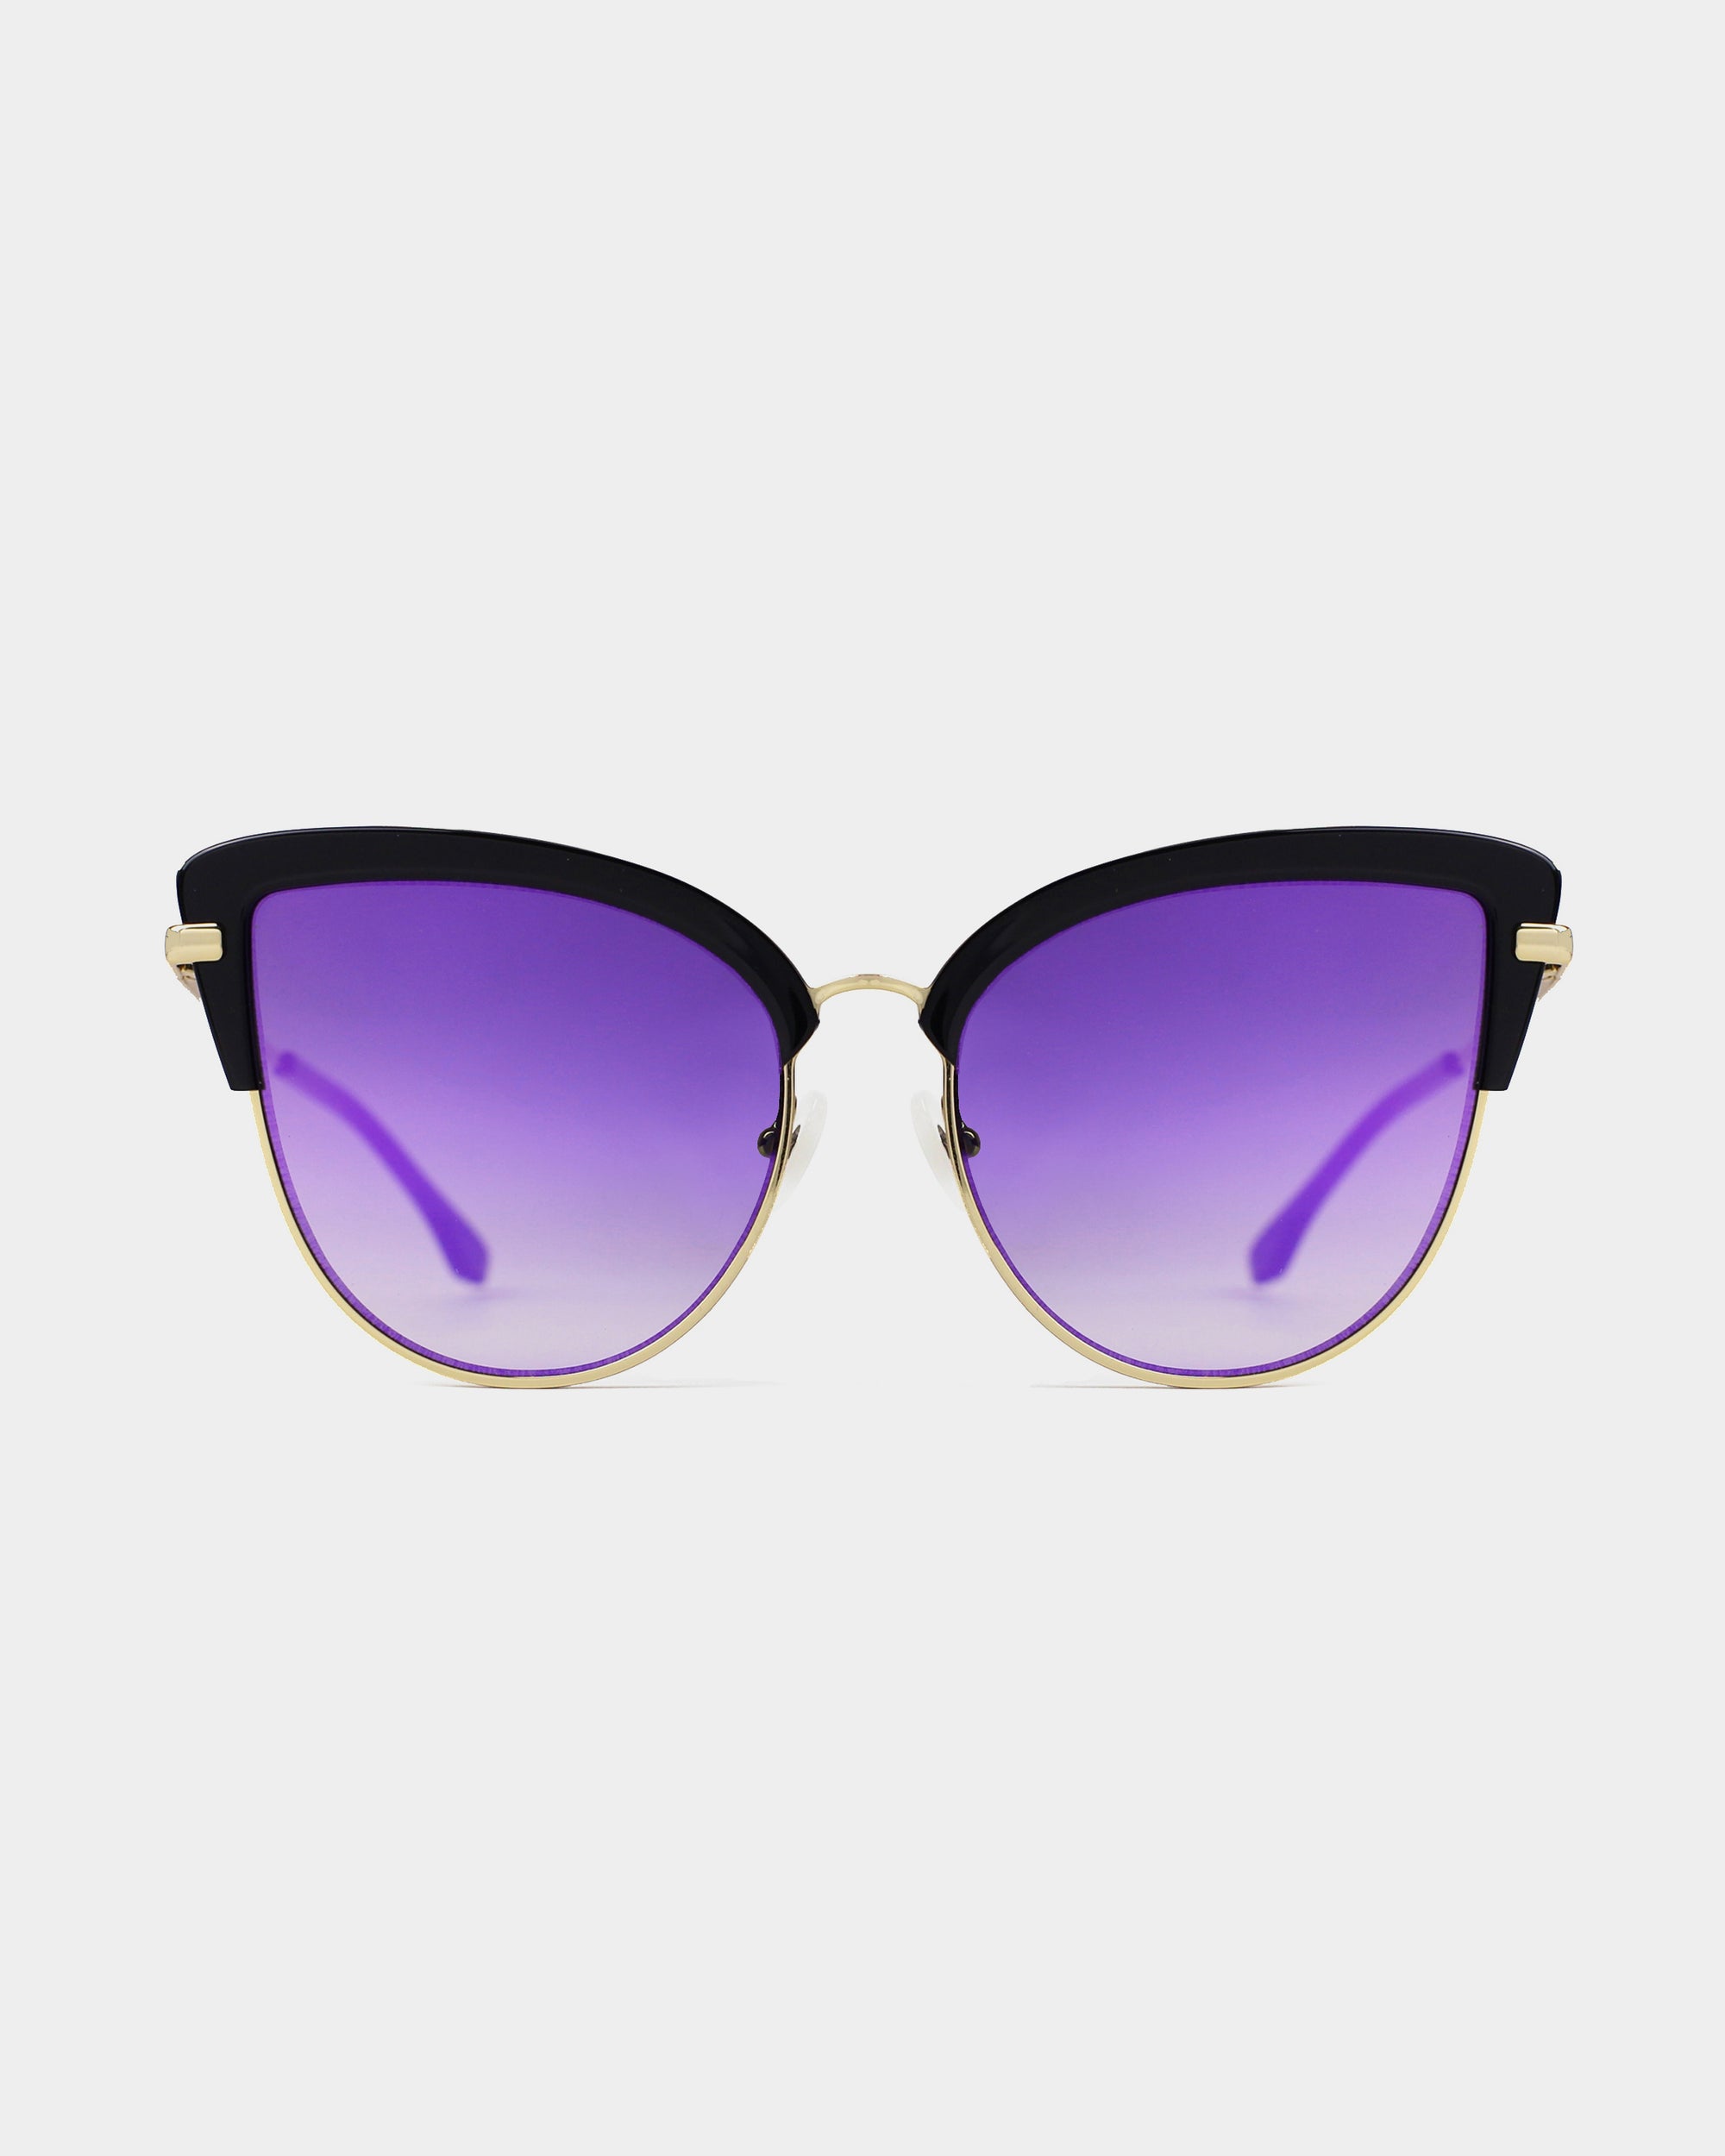 A pair of stylish cat-eye sunglasses featuring nylon gradient purple lenses, black upper rims, and 18-karat gold plating on the nose bridge and temples. The background is plain white, emphasizing the sleek and elegant design of Venus by For Art's Sake®.